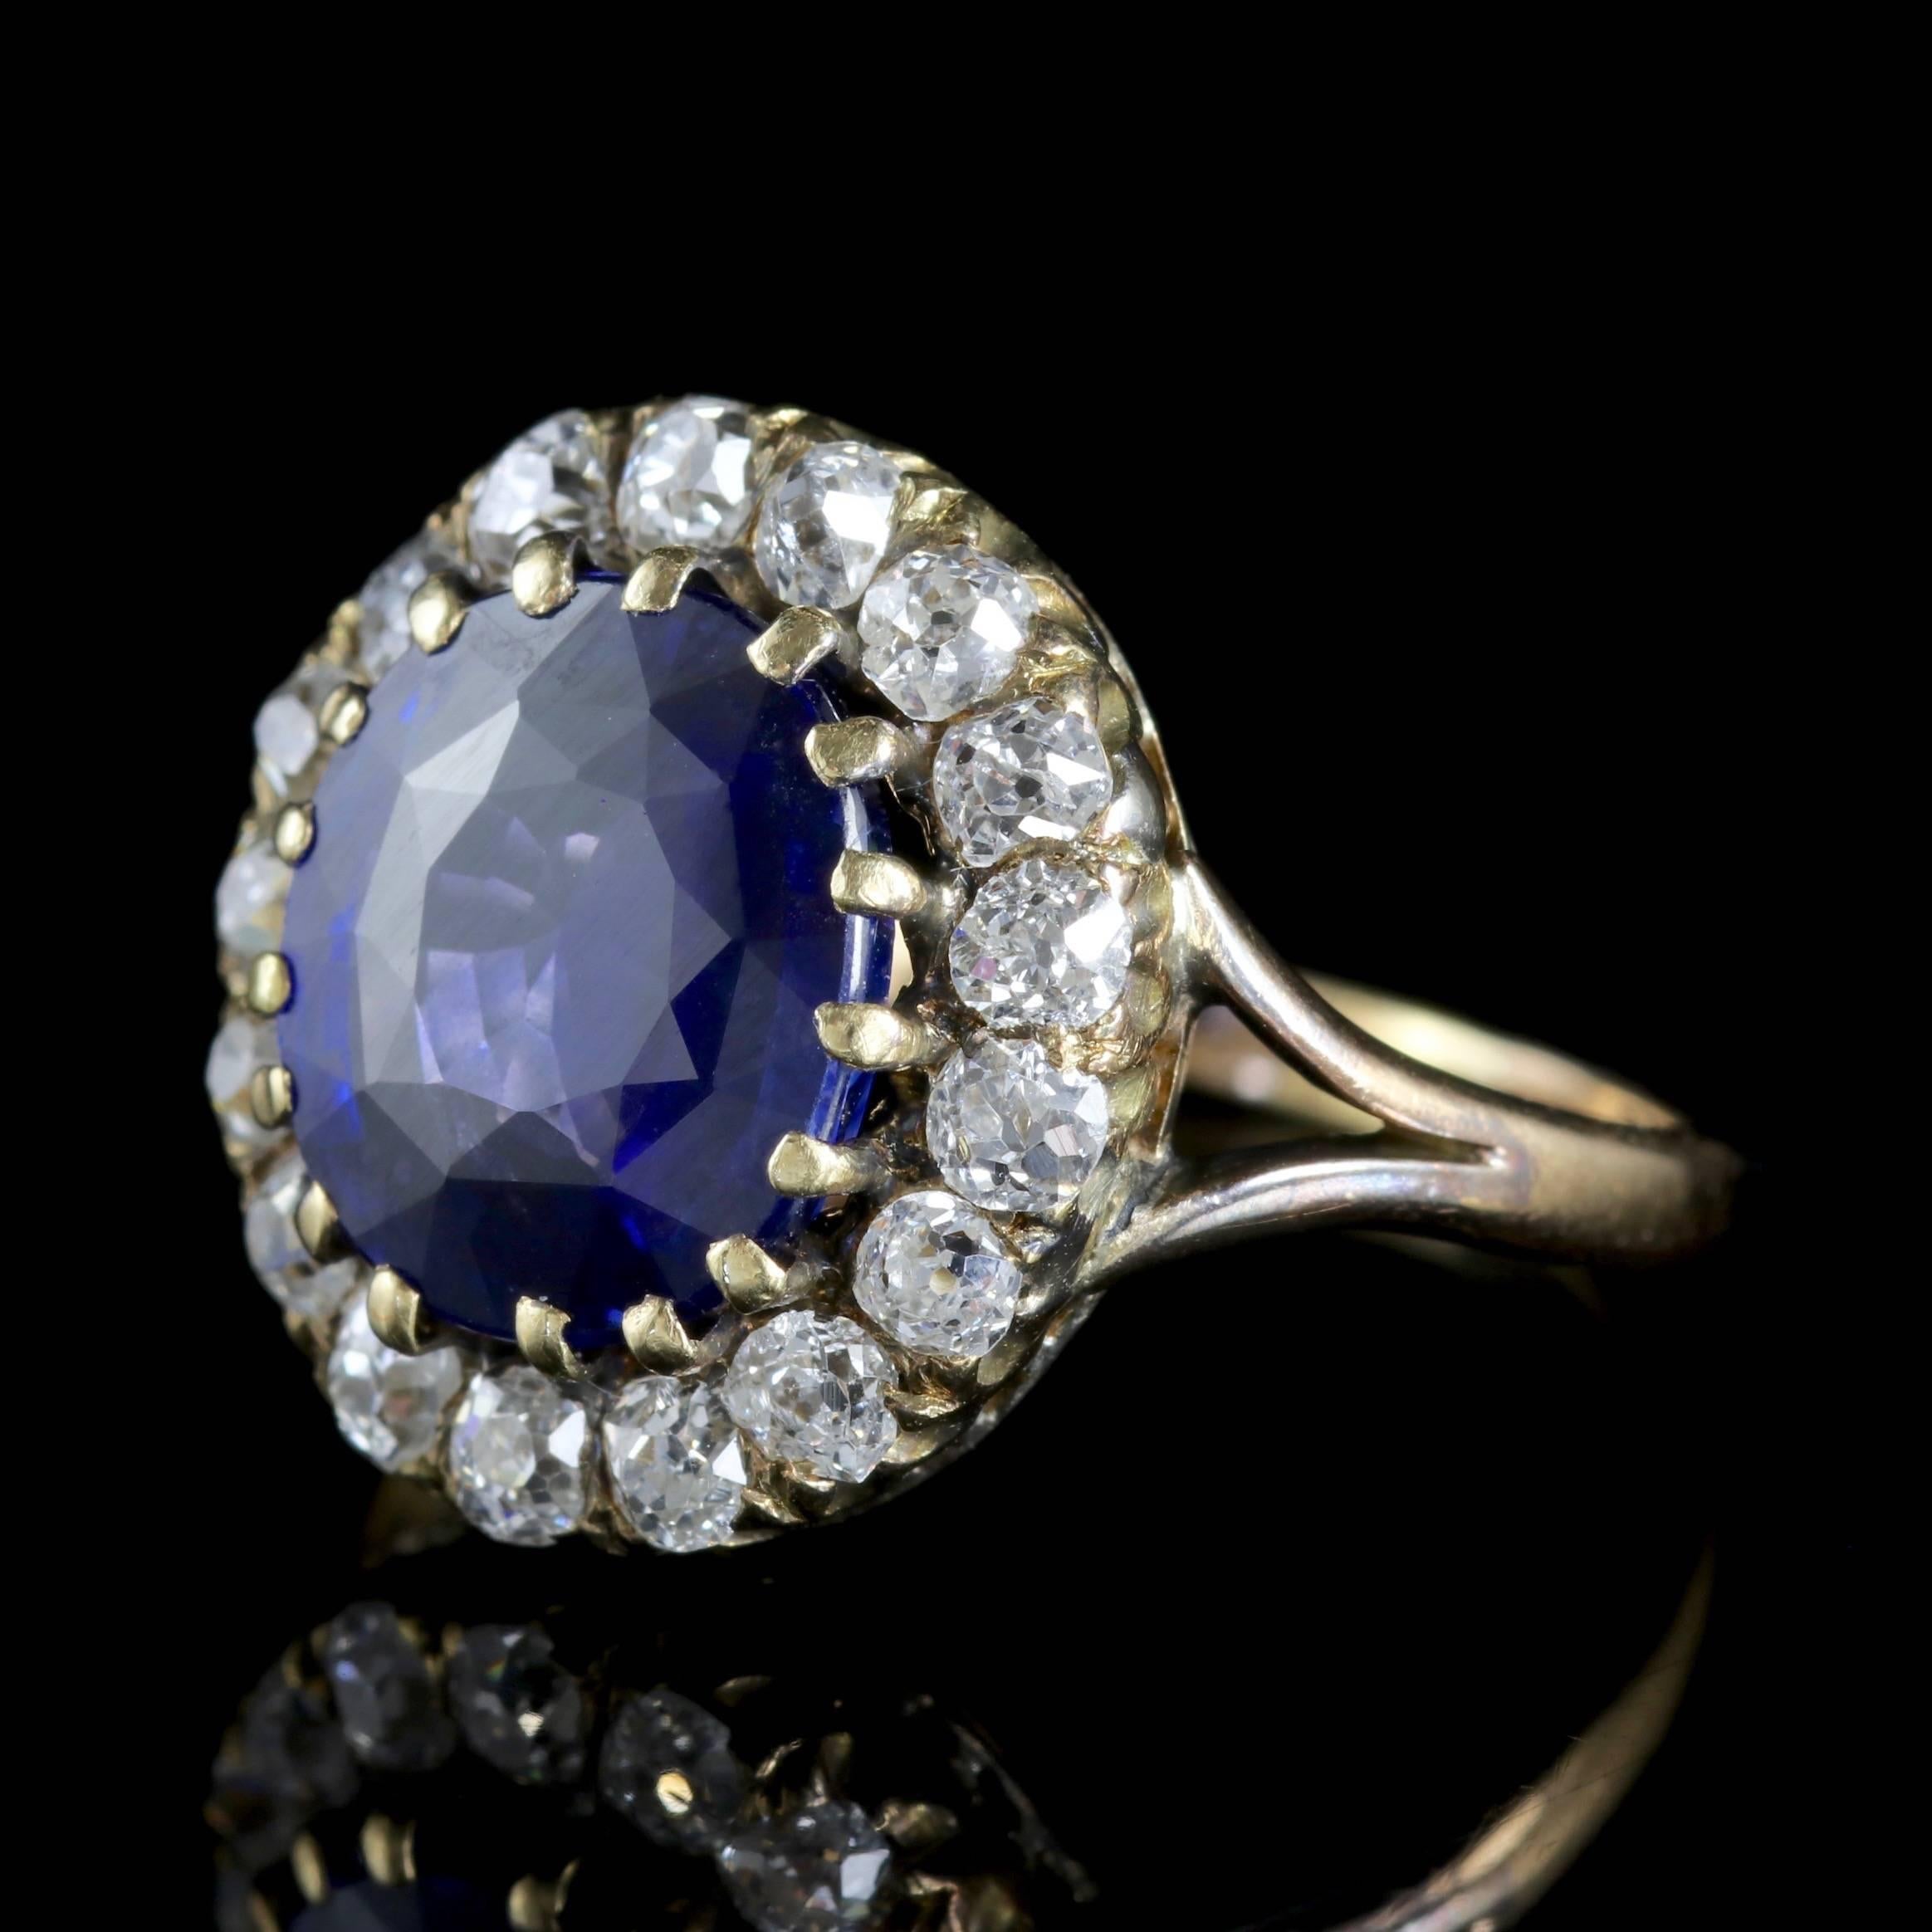 To read more please click continue reading below-

This magnificent antique cluster ring is set with a 3.60ct natural blue Sapphire, all original from the Victorian era, Circa 1880. 

The Sapphire is natural, heat may have been applied to bring out